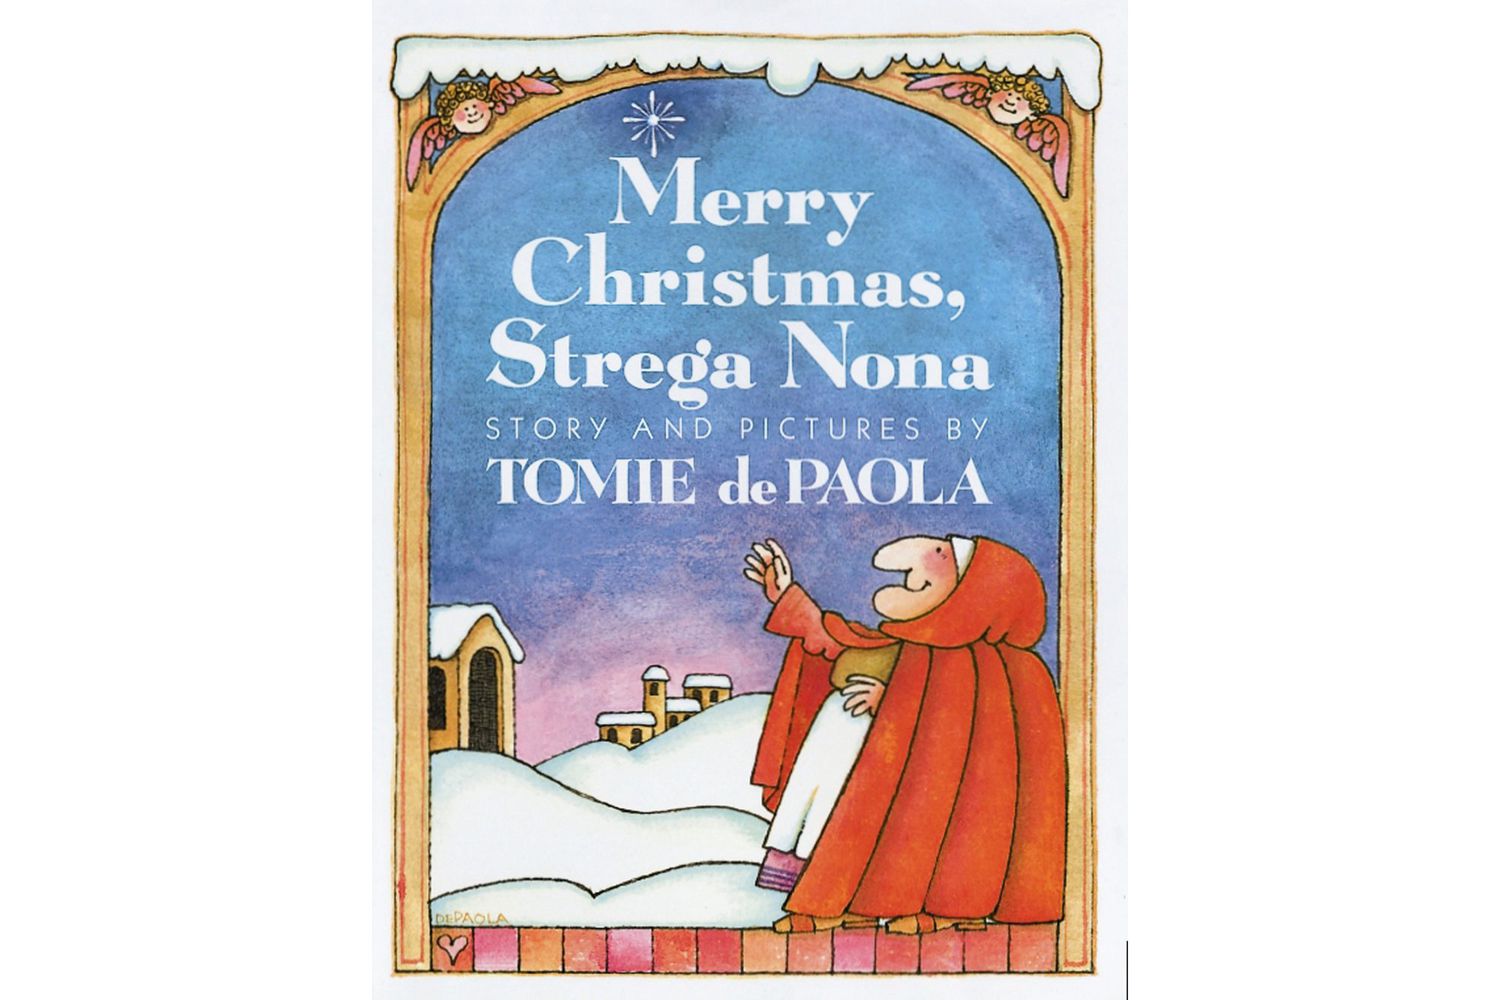 Merry Christmas, Strega Nona, by Tomie dePaola